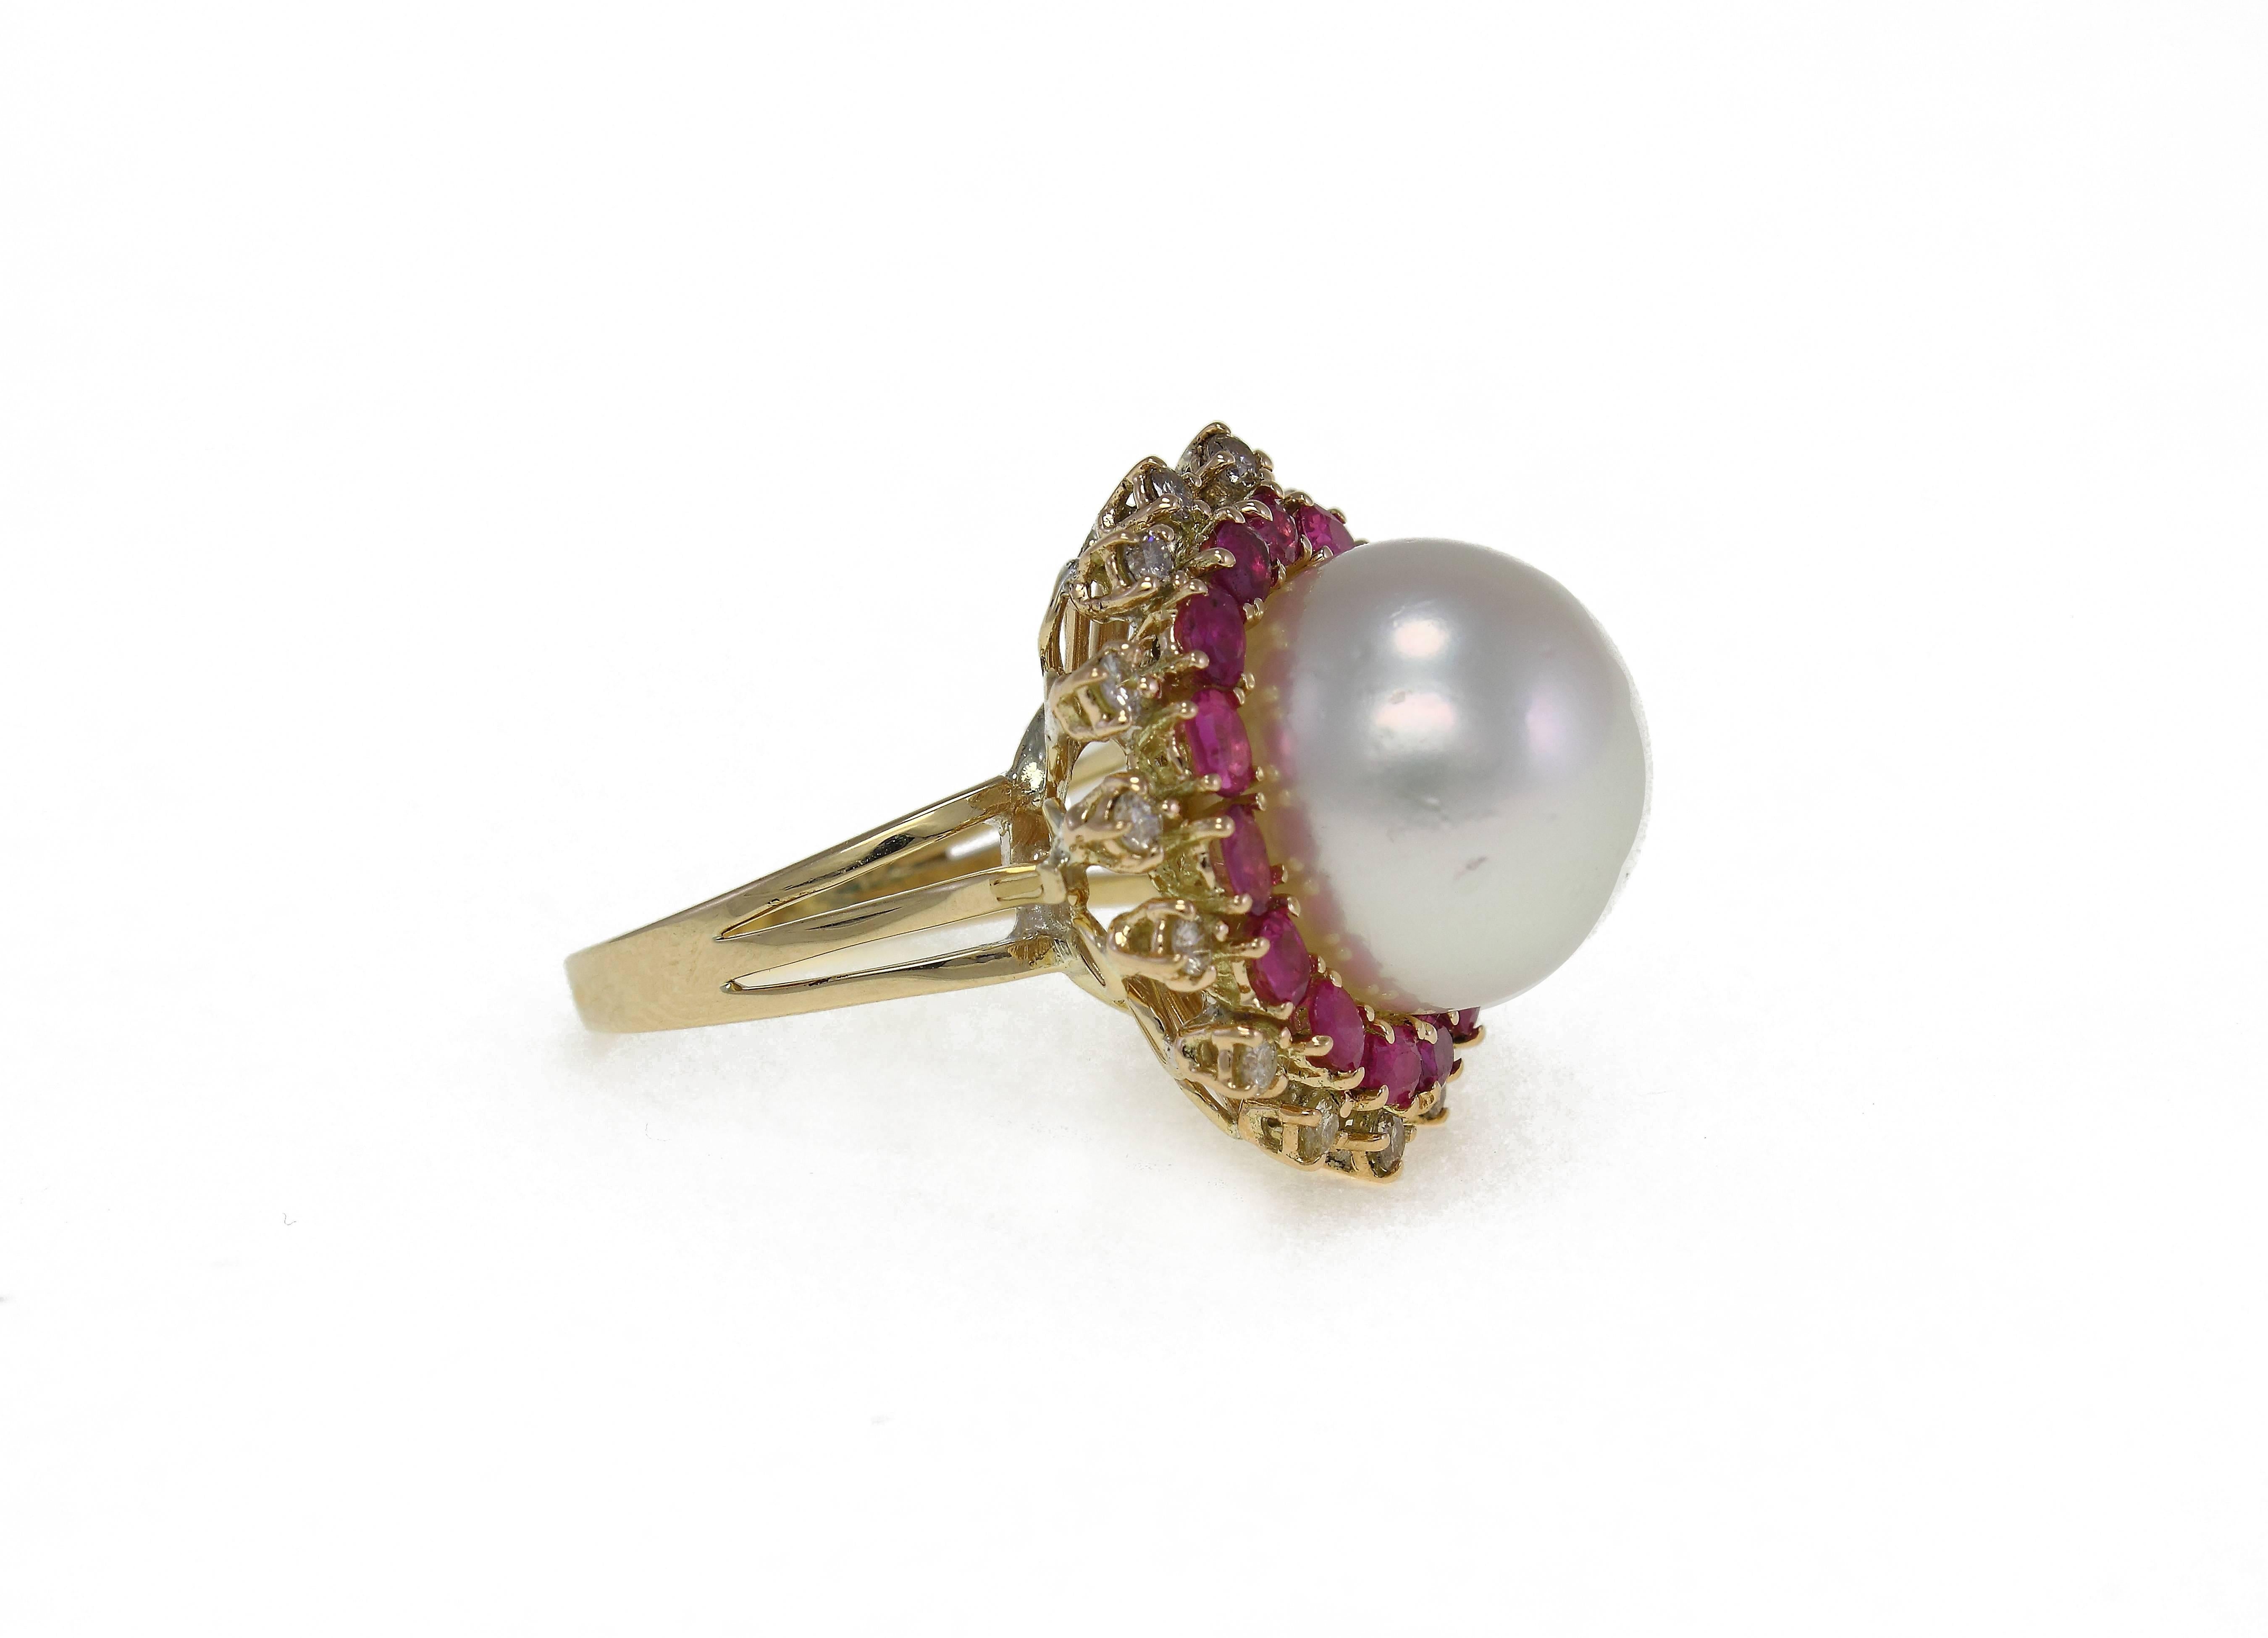 Graceful ring in 14Kt gold composed of a central pearl surrounded by a crown od rubies and diamonds.

diamonds (0.56 kt) 
rubies (2.09 kt)p
earl diameter of 14.5 mm
tot weight 12.4gr
US Size
Width 0.90 inch
Length 0.90 inch
Higth (worn) 0.59